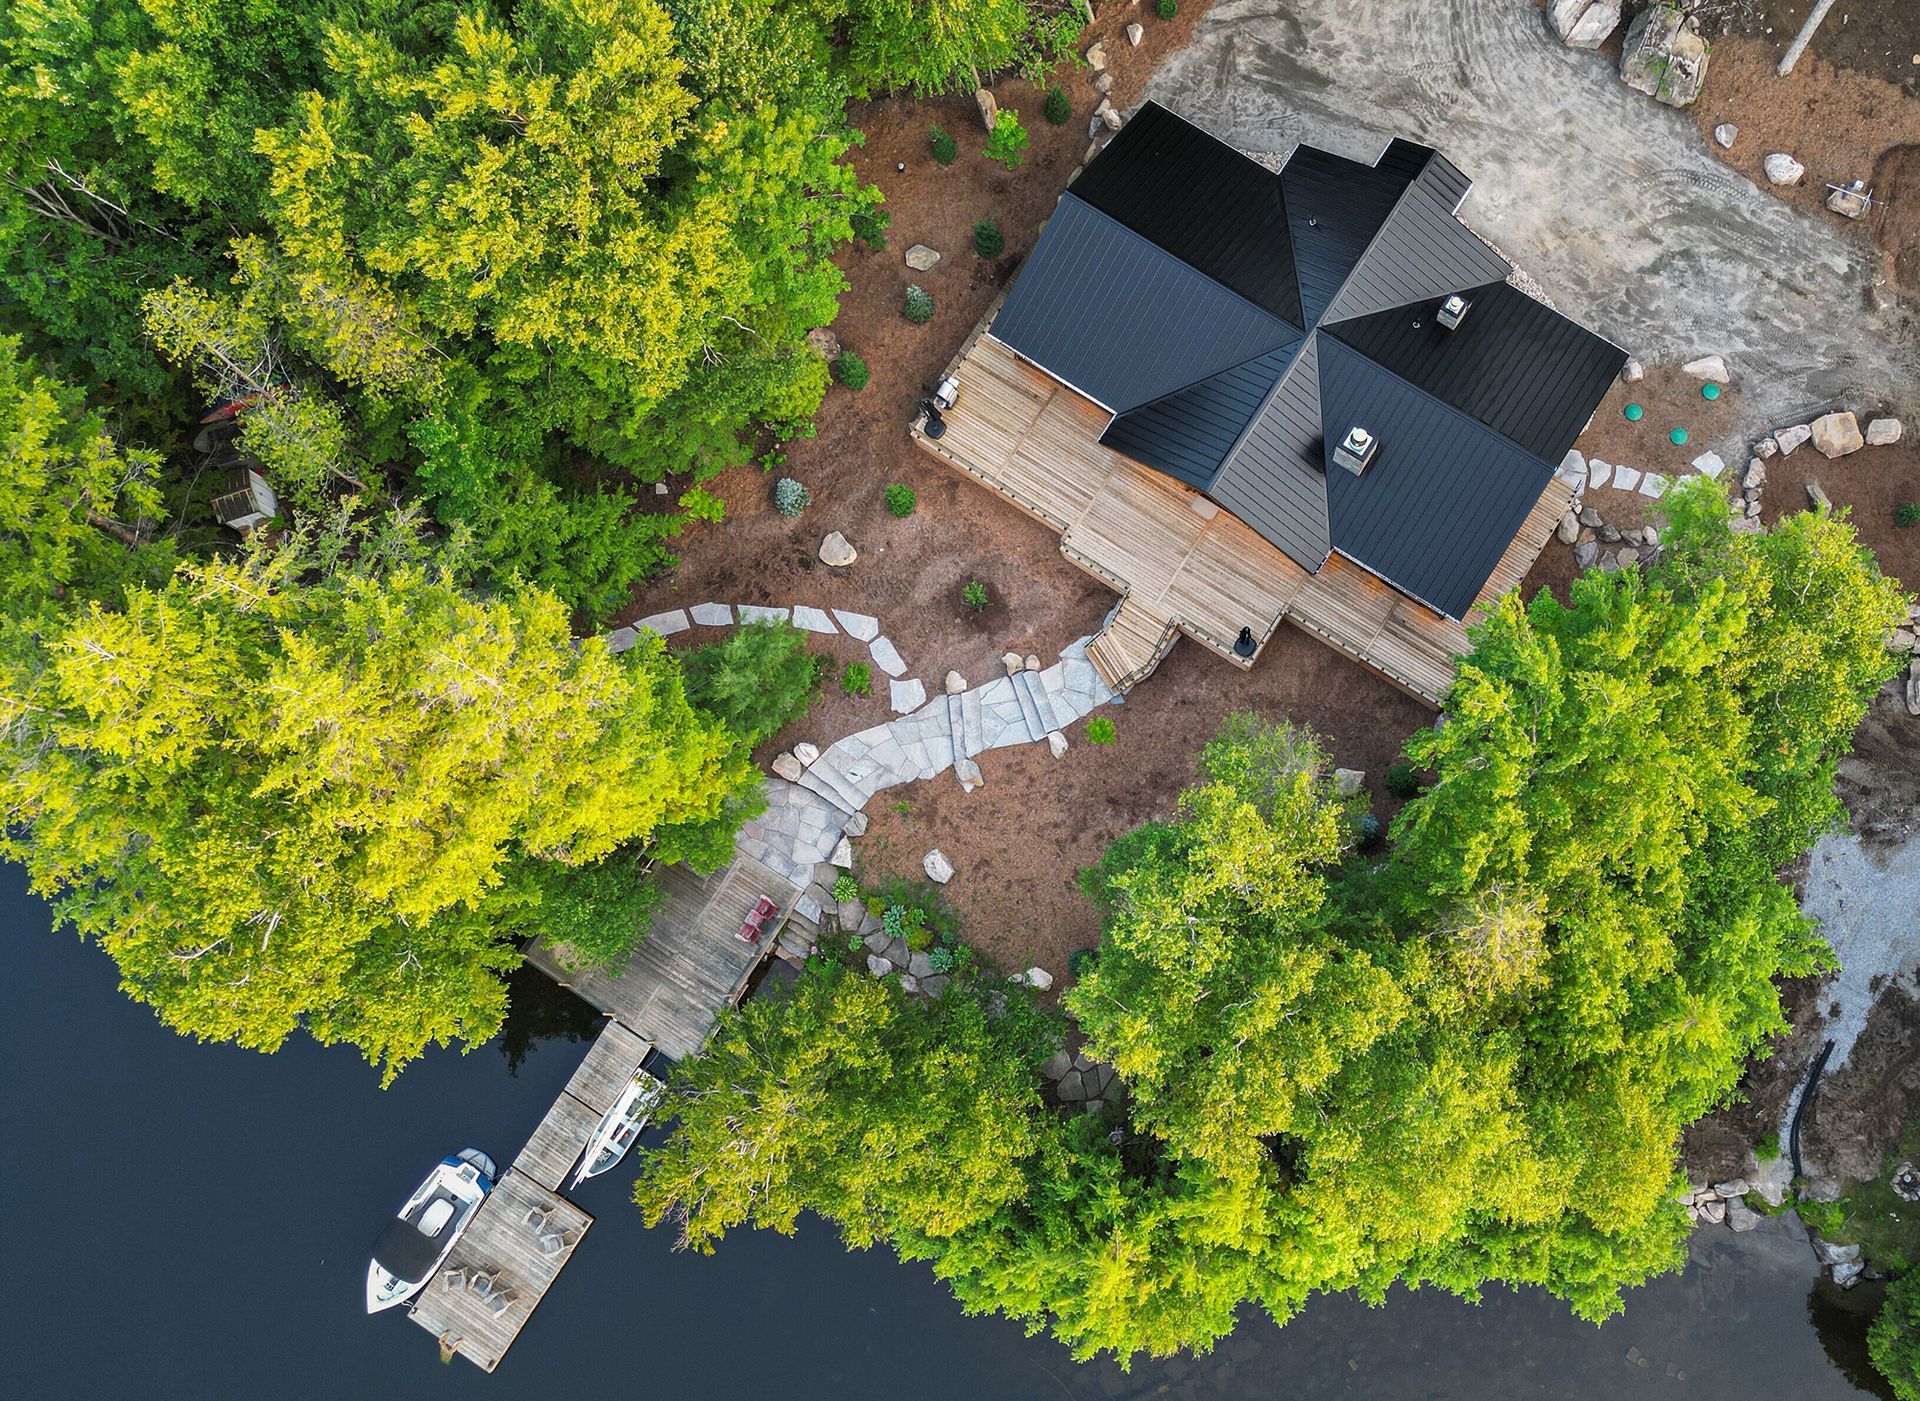 High view over a lakefront cottage, showing steel roofing, walkways, pier and lake.